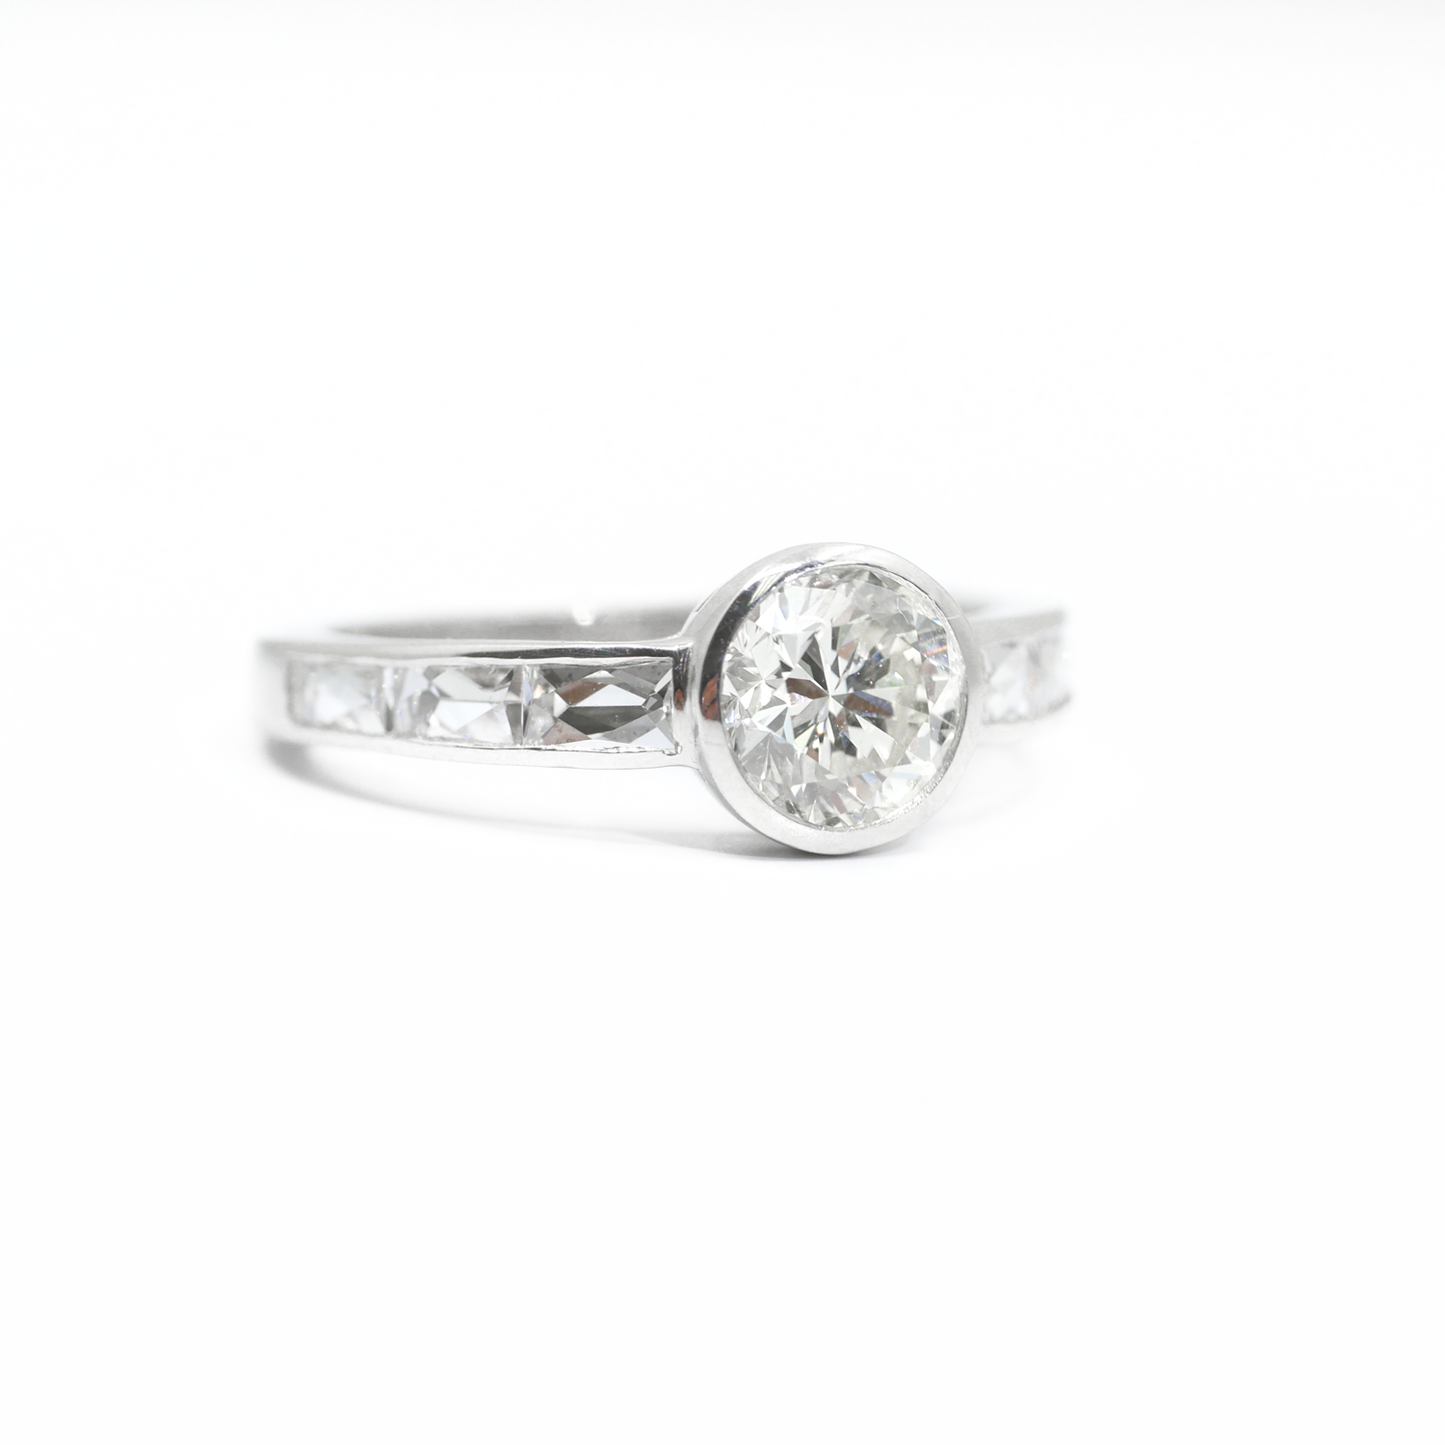 Bezel Set Diamond Ring with French Cut Diamond Accents